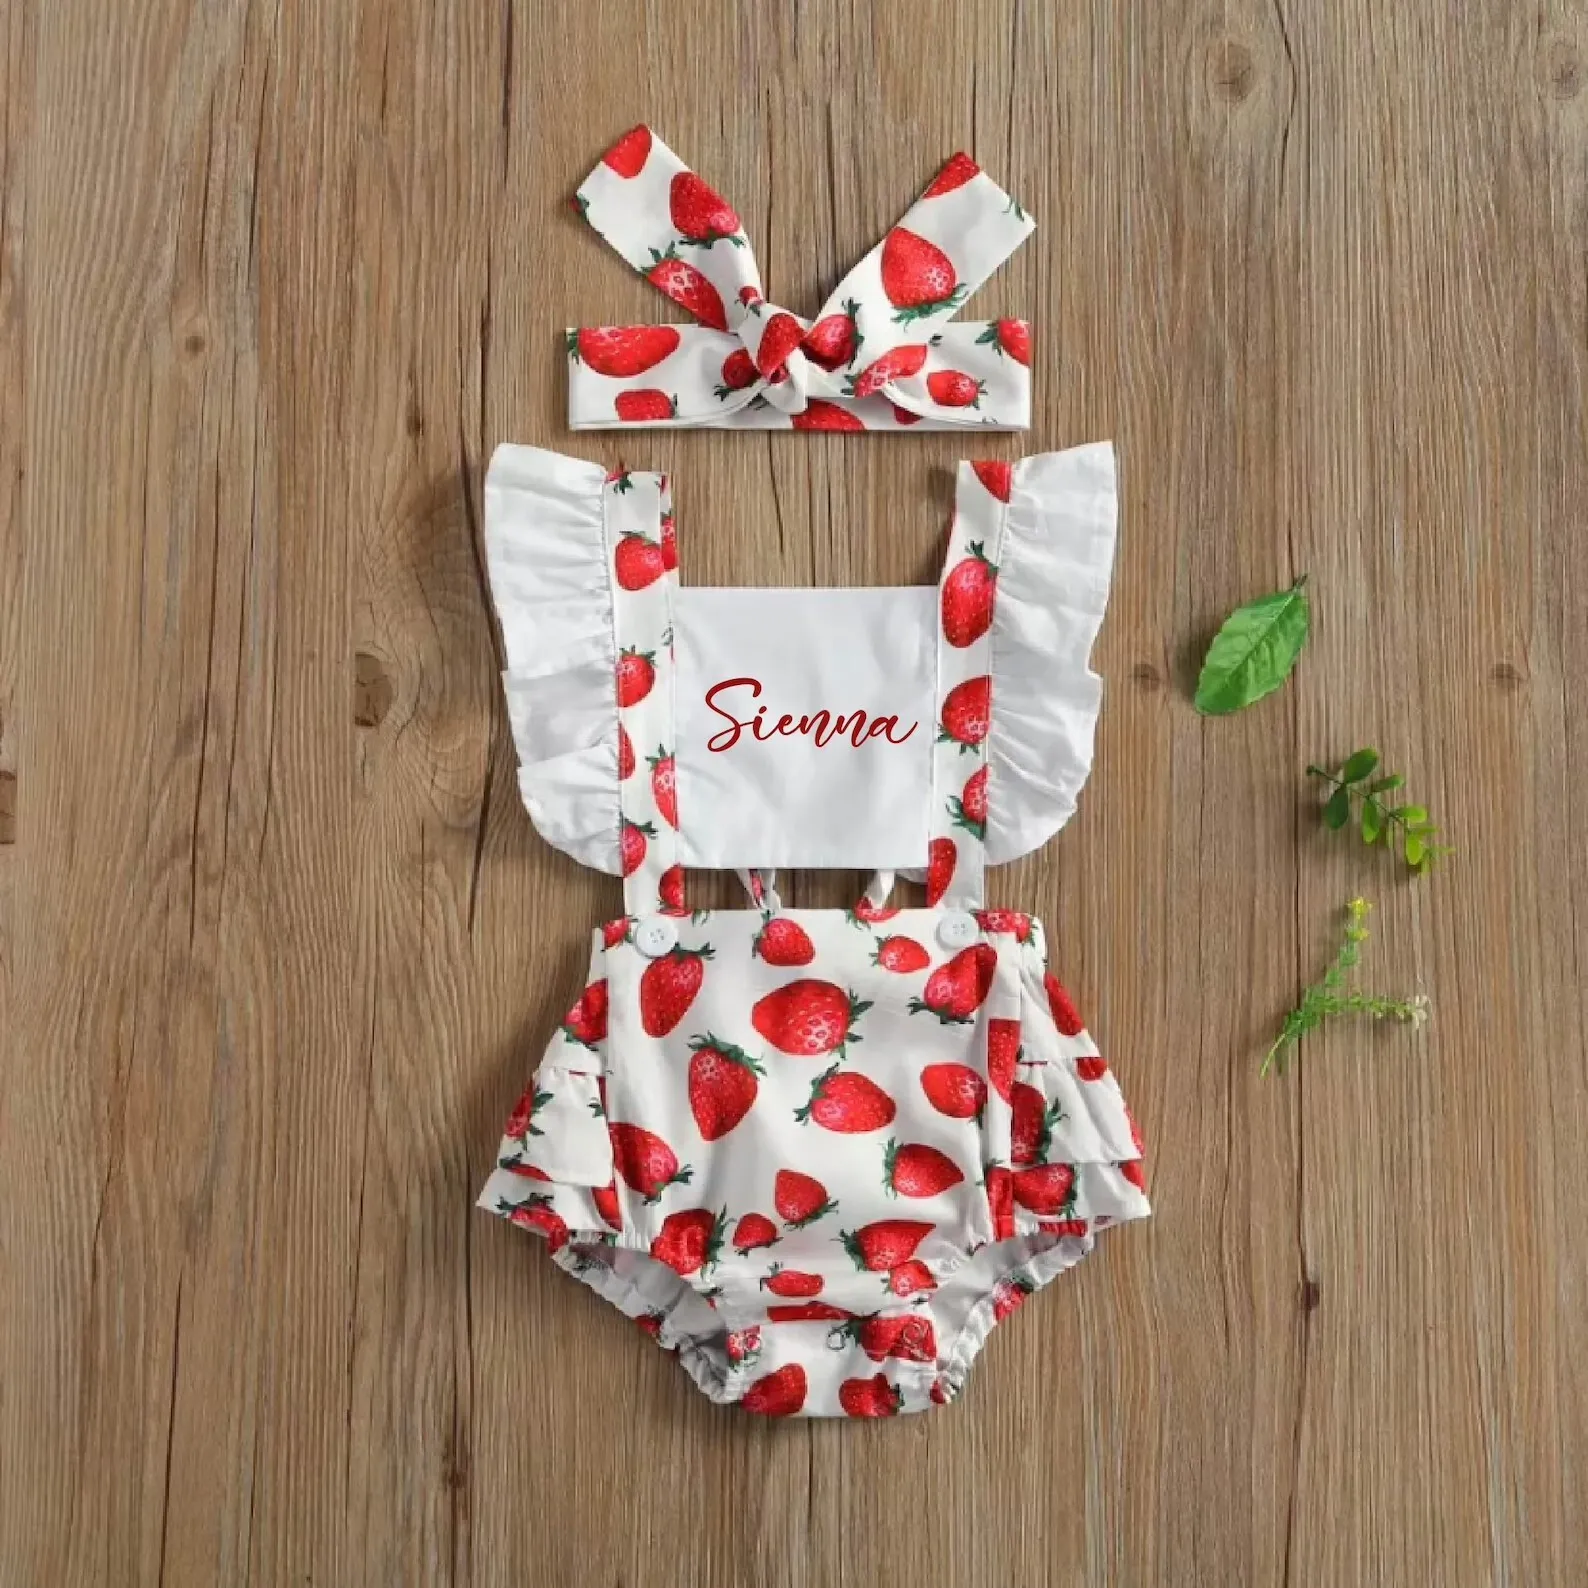 

Baby Girl Strawberry Outfit Personalized Berry First Birthday Outfit Sweet Birthday Clothes Baby Shower Gift Toddler Photoshoot